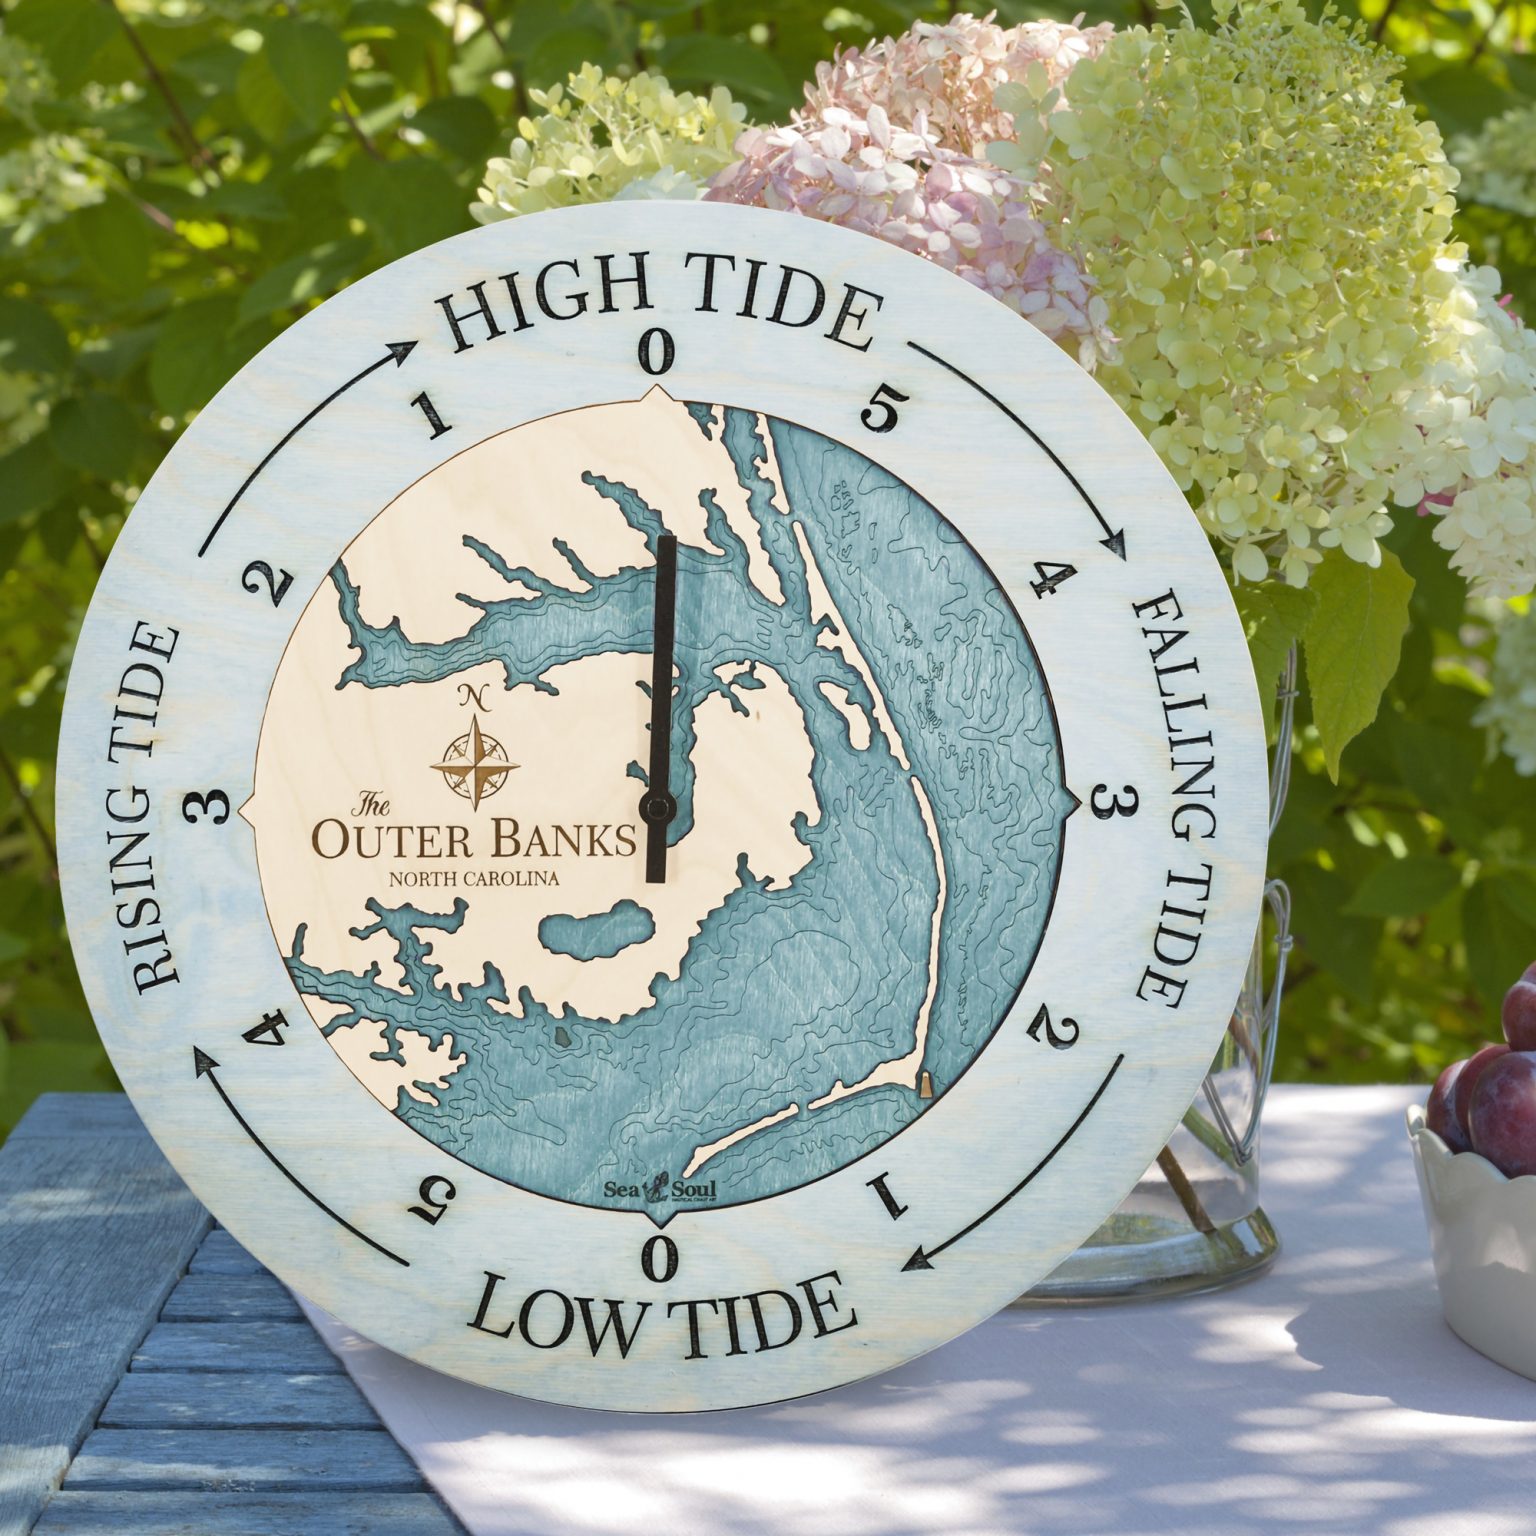 Outer Banks Tide Clock Sea and Soul Charts